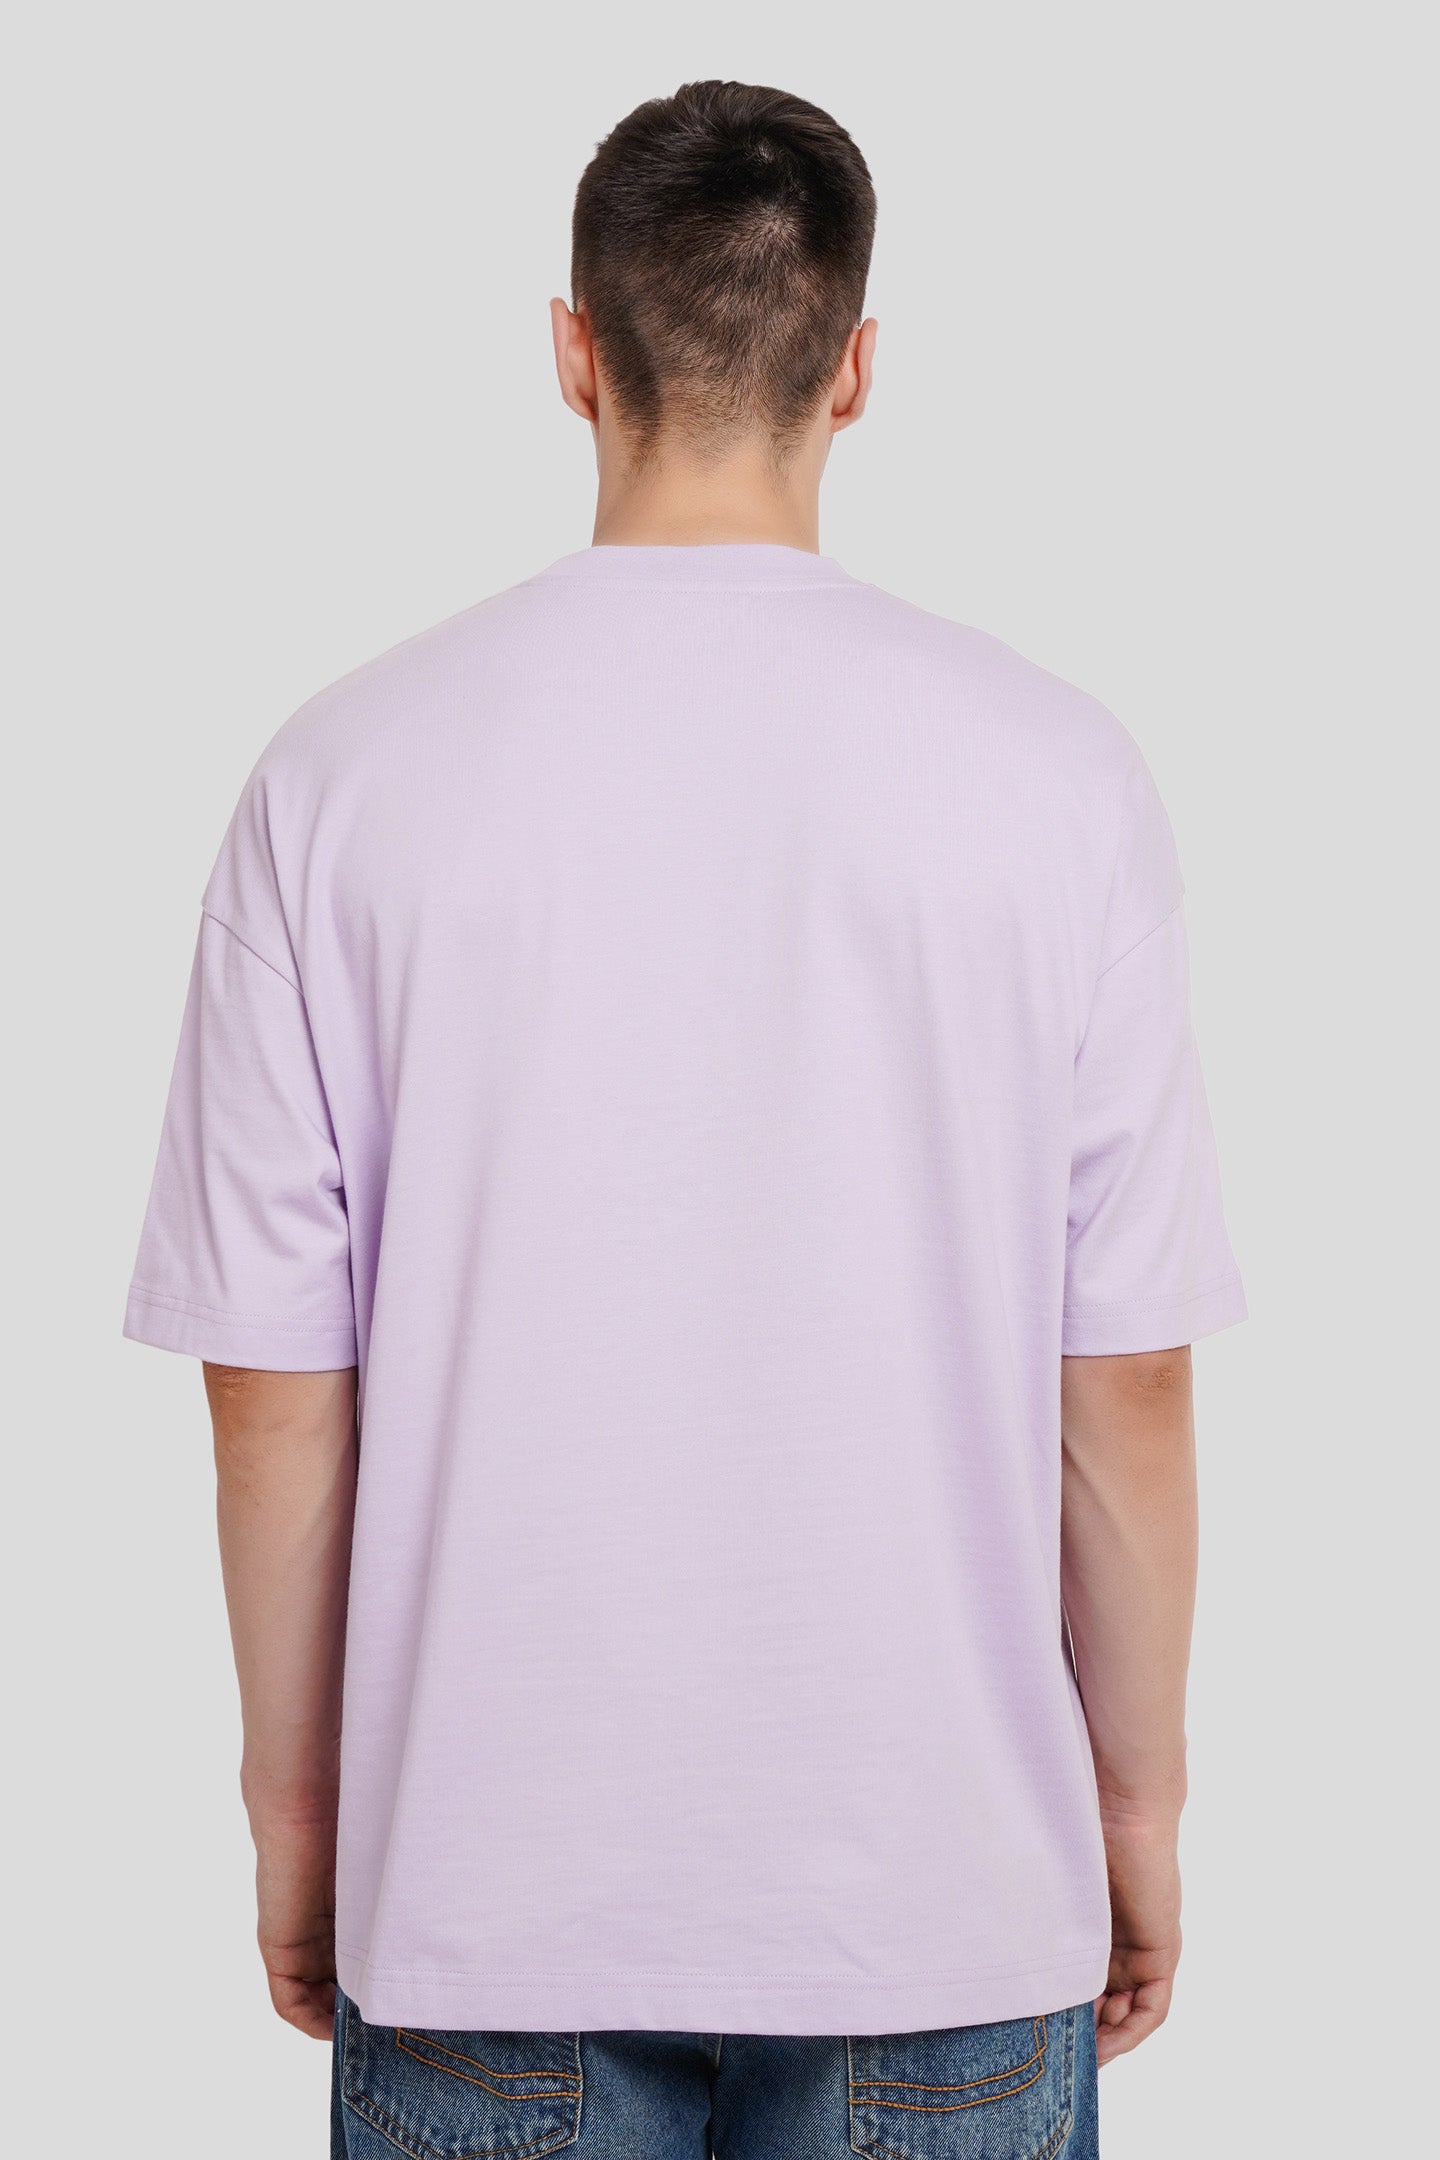 There Is No Finish Line Lilac Printed T Shirt Men Baggy Fit With Front Design Pic 2